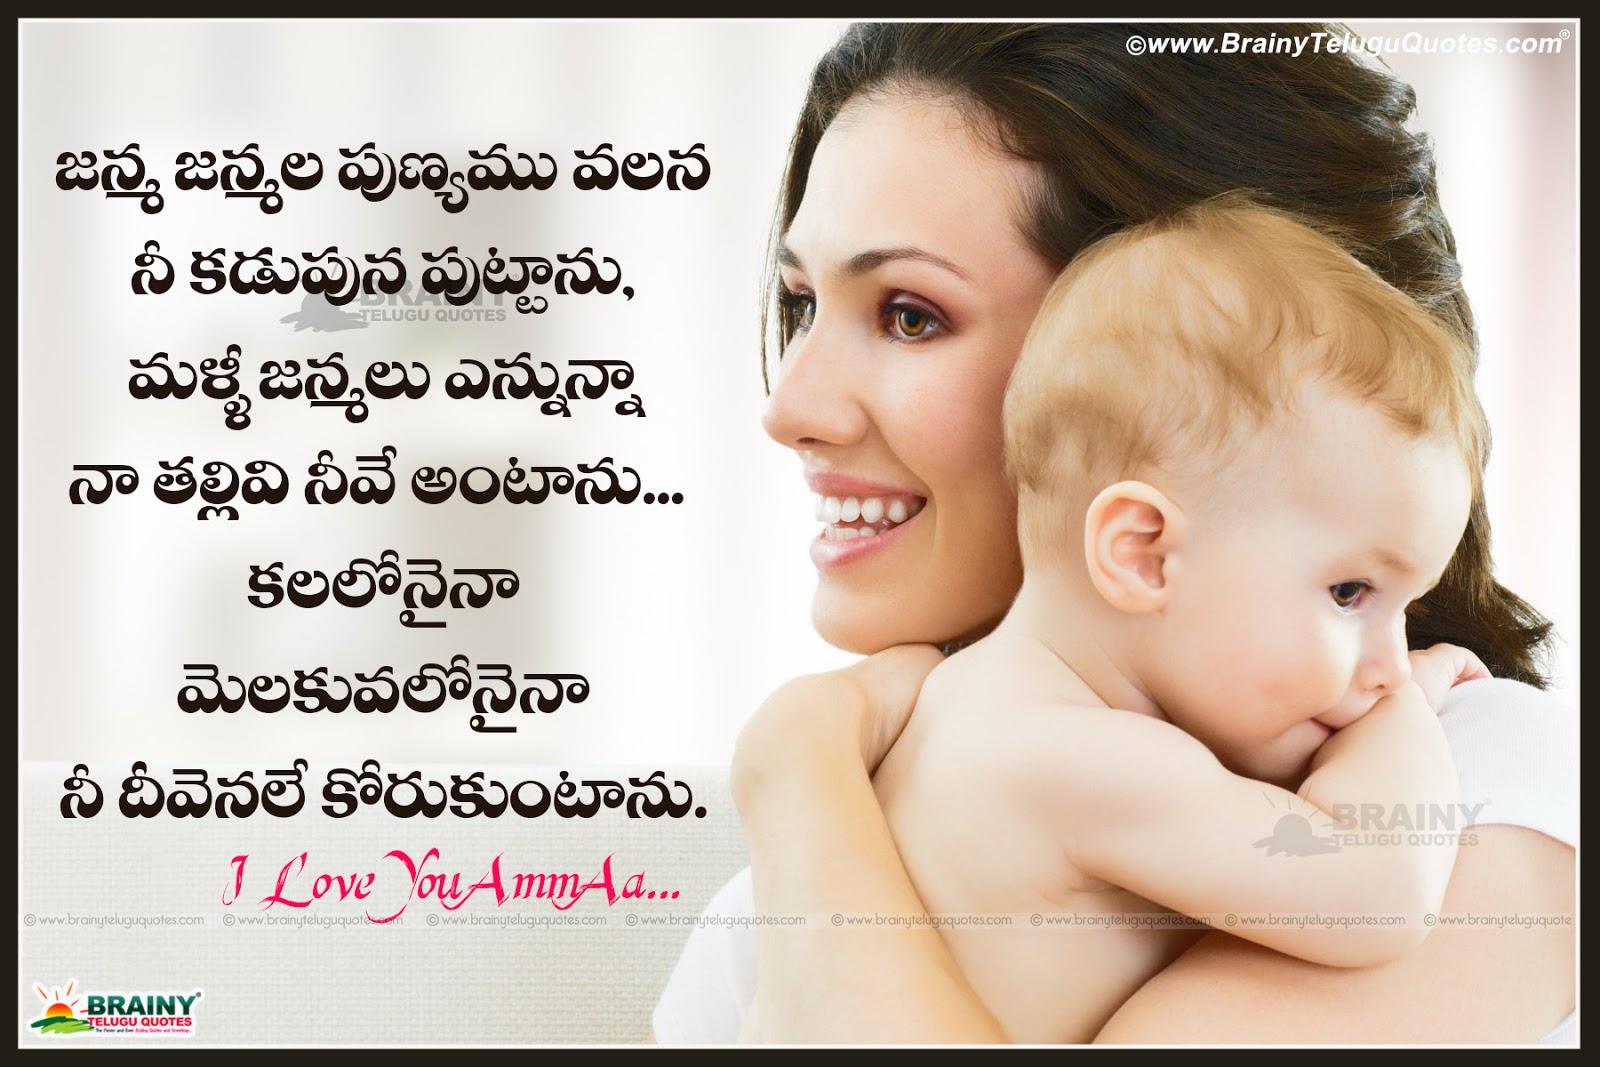 Telugu Best Heart Touching Mother S Love Quotations With Nice Mother Child Images Brainyteluguquotes Comtelugu Quotes English Quotes Hindi Quotes Tamil Quotes Greetings